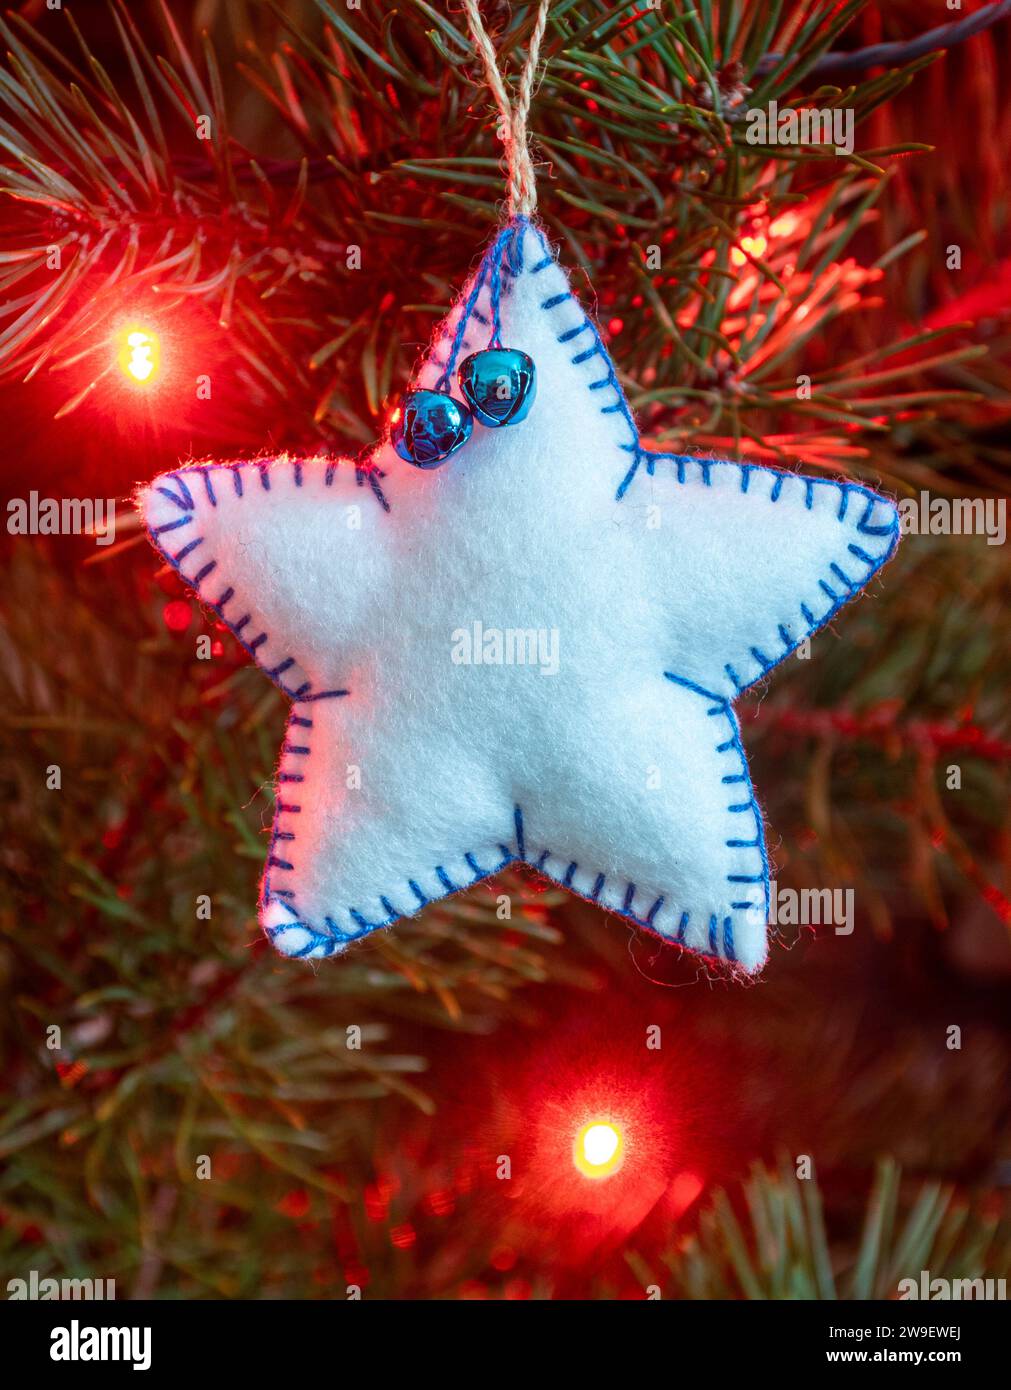 Homemade handicraft felt Christmas tree decorations on a tree with lights, a white star Stock Photo